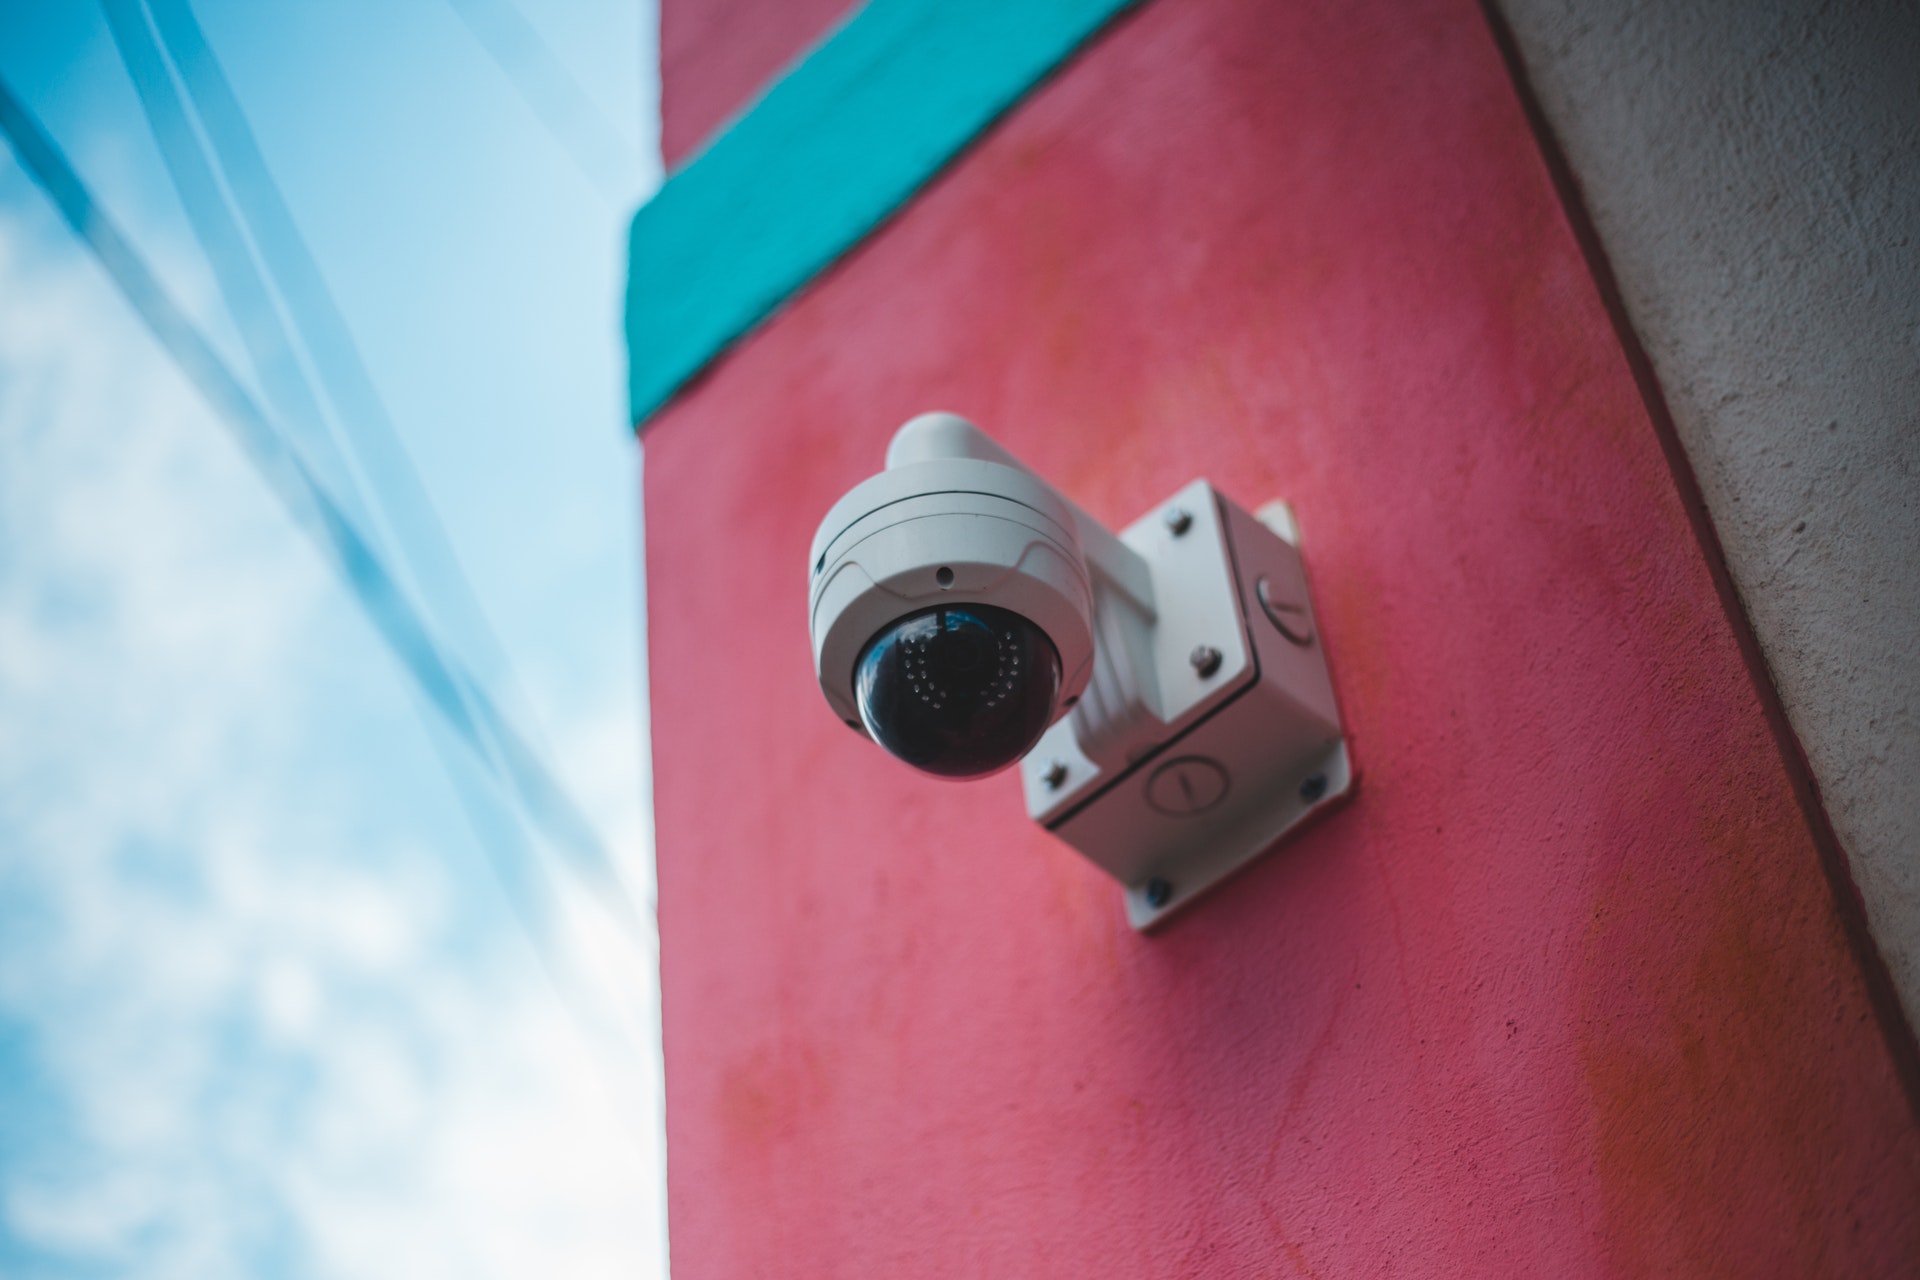 CCTV systems remain high on the list of desired security systems at multifamily developments in 2021.